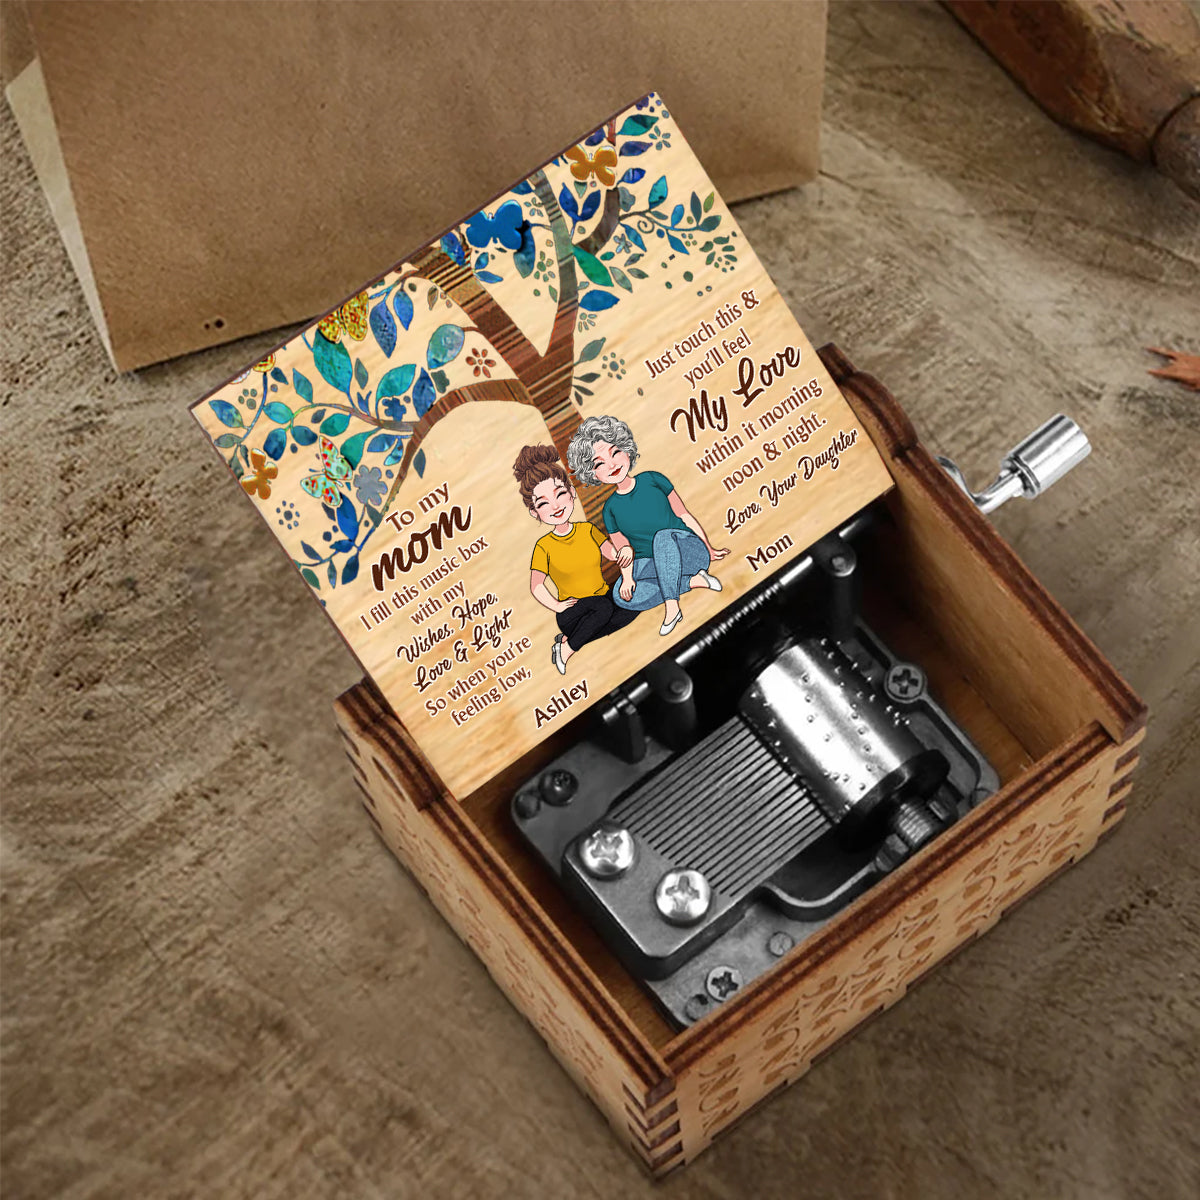 To My Mom - Personalized Mother's Day Mother Hand Crank Music Box